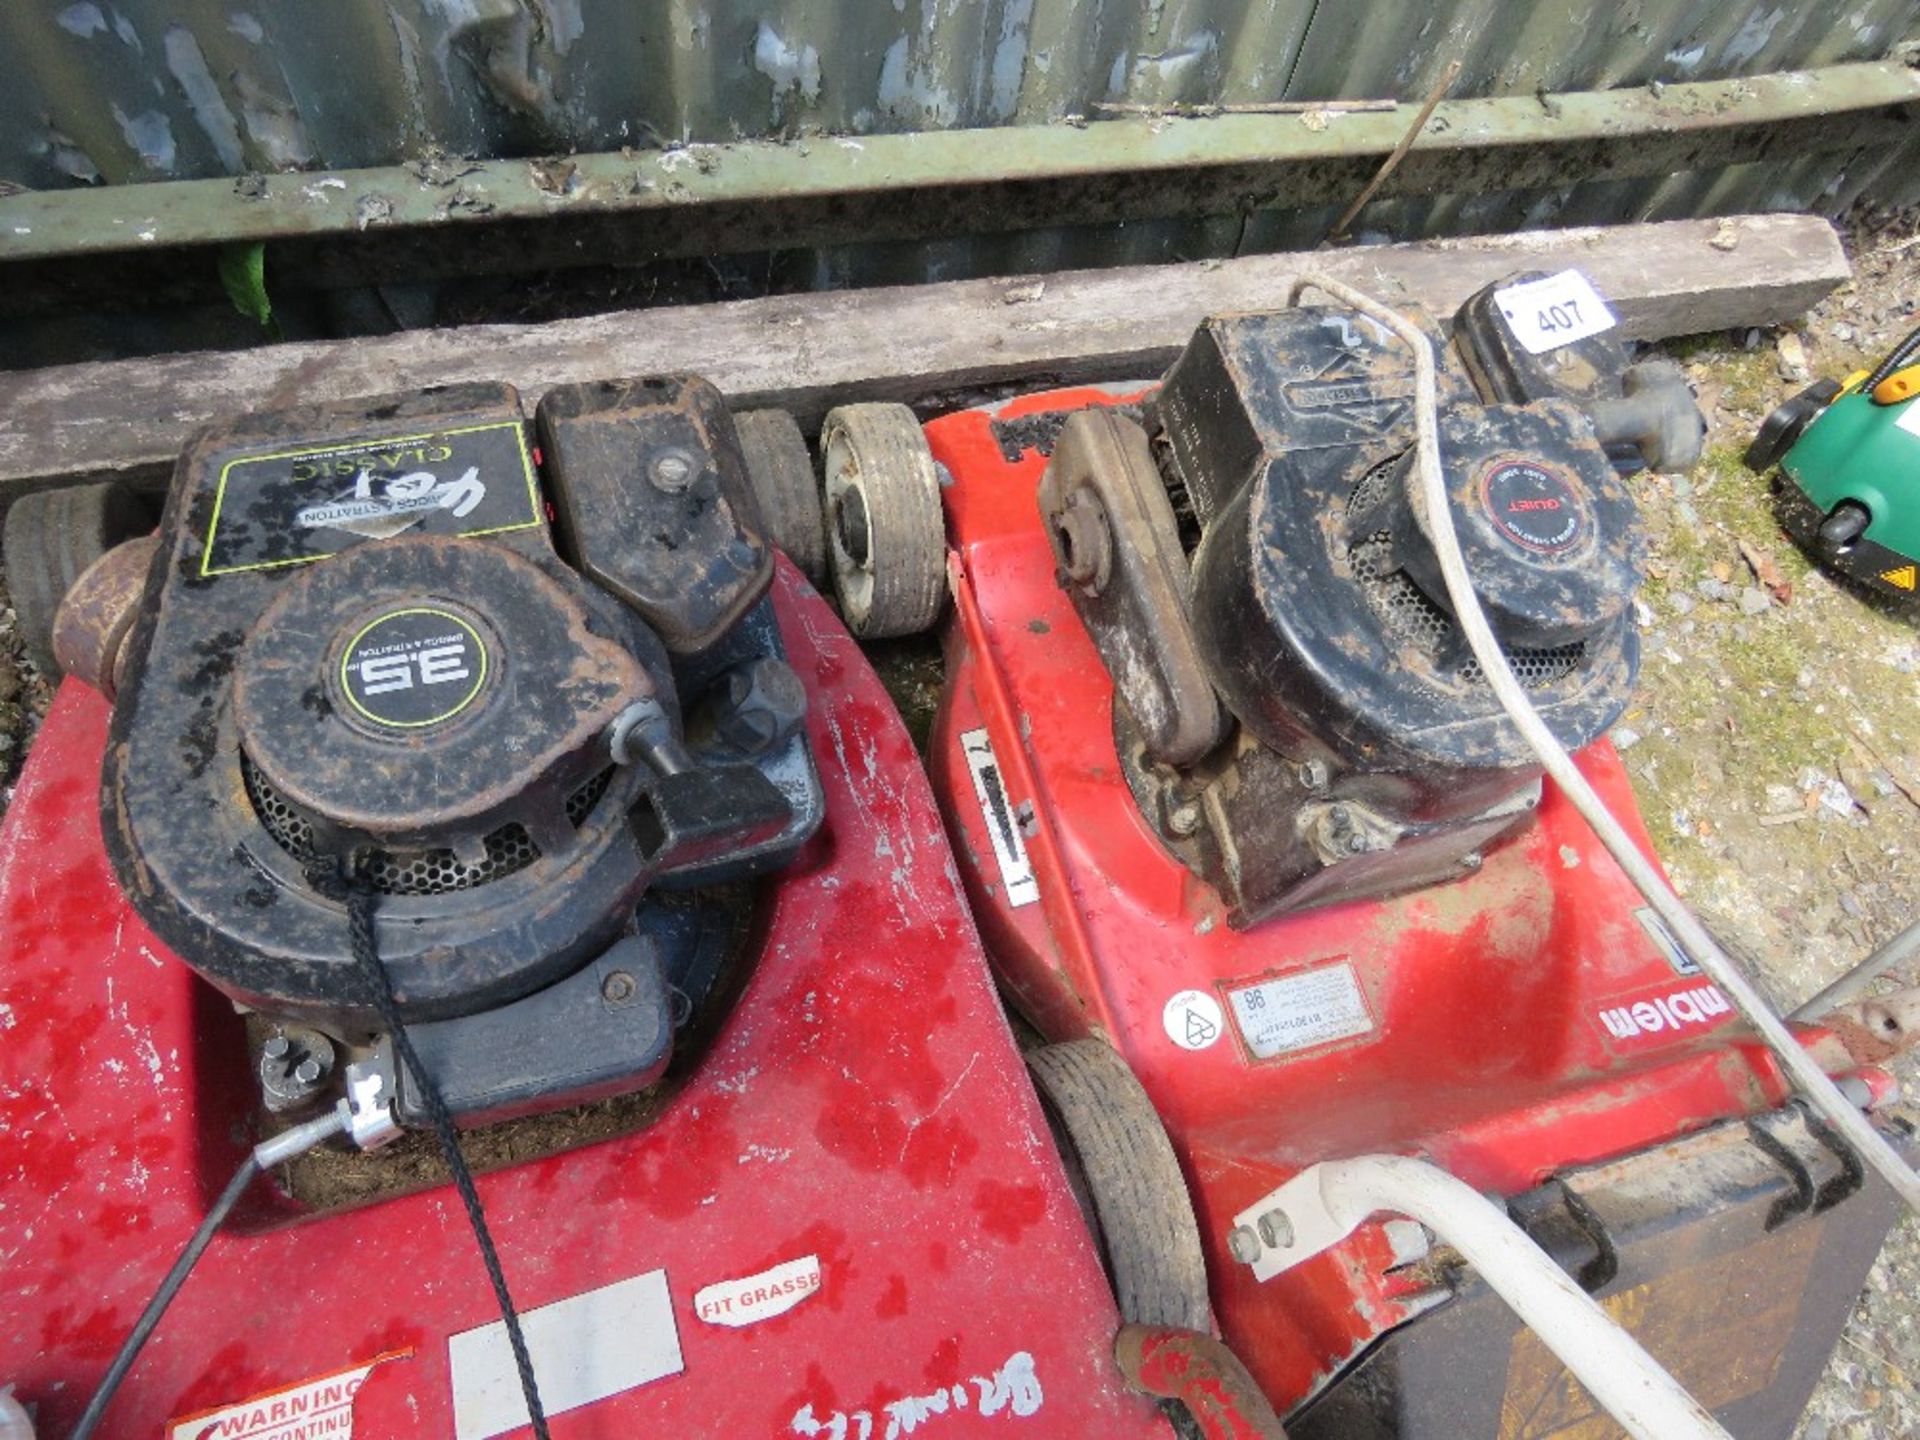 2 X PETROL ENGINED LAWN MOWERS. - Image 6 of 6